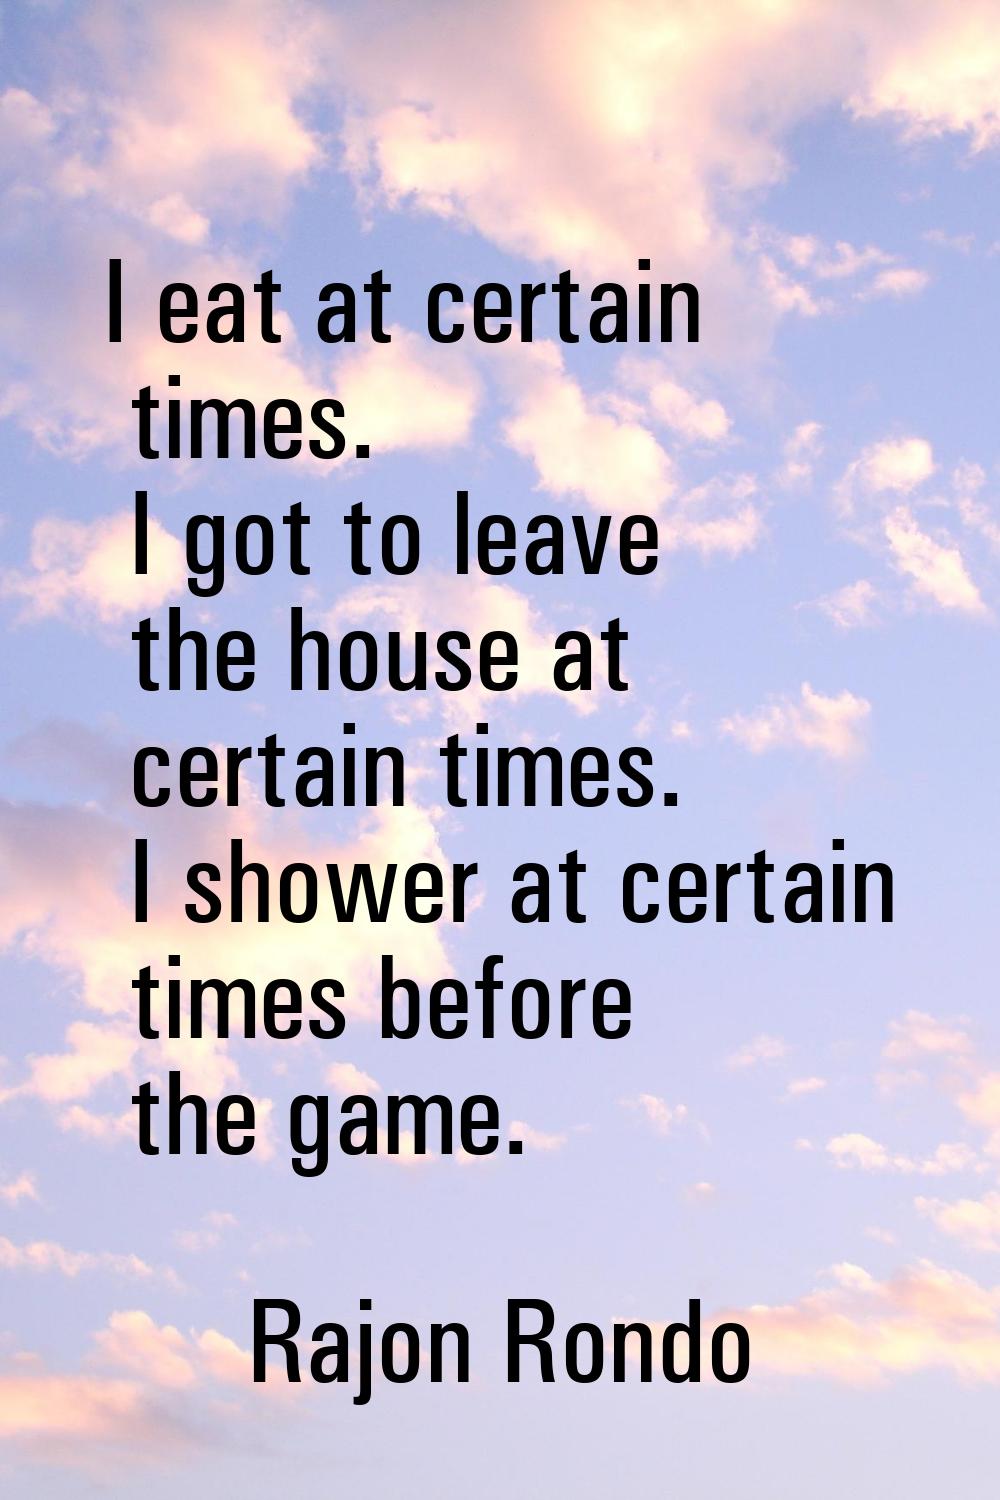 I eat at certain times. I got to leave the house at certain times. I shower at certain times before